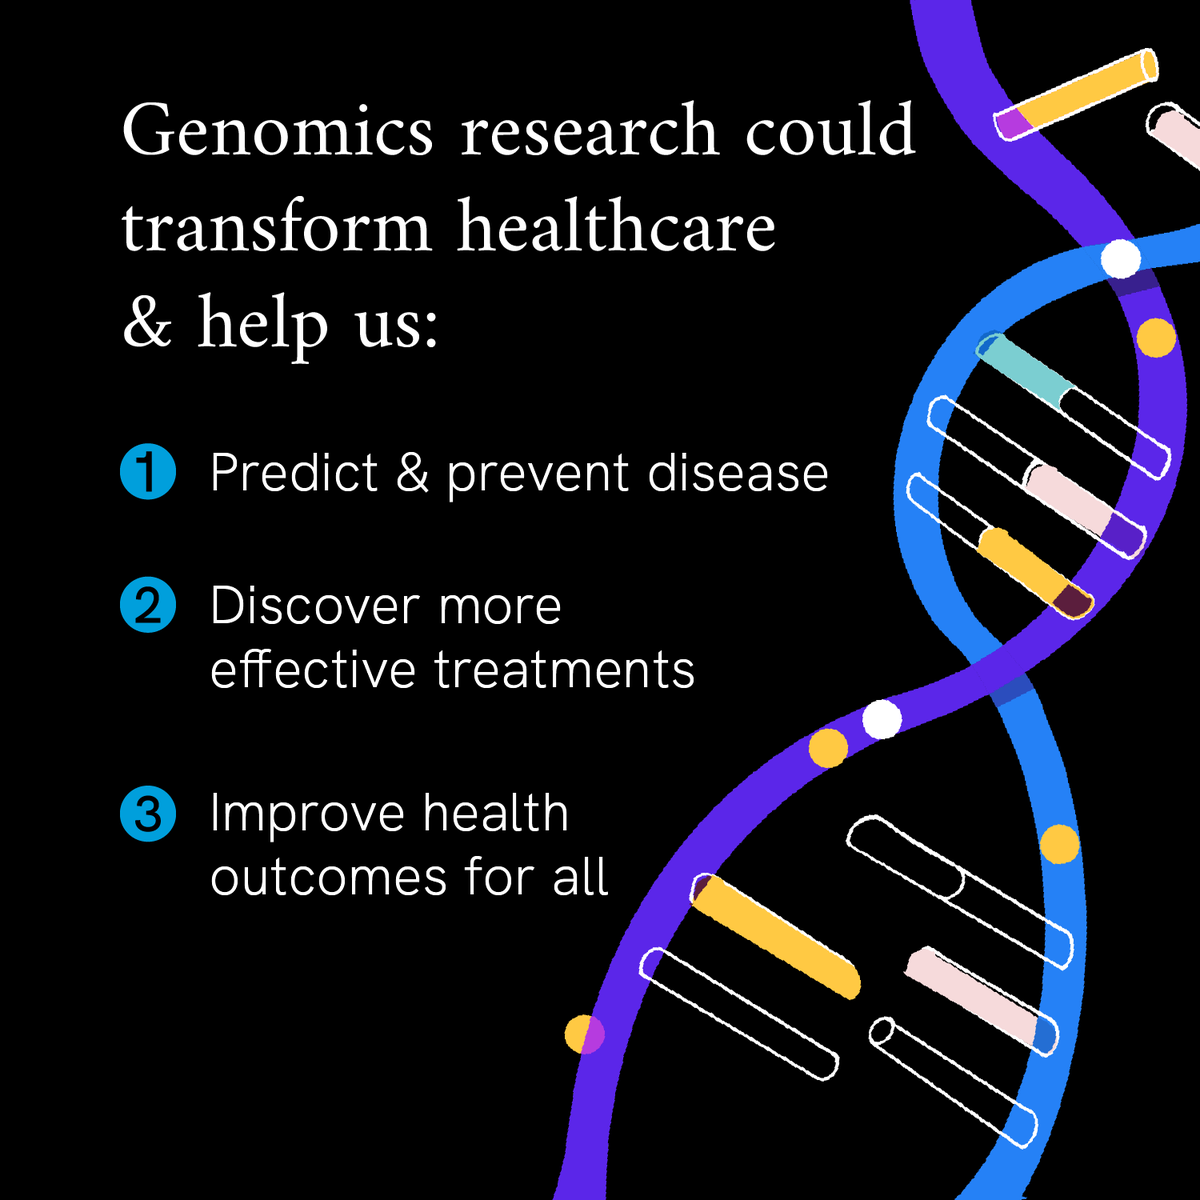 Increasing gaps in genomics research could transform health outcomes for everyone. #PrecisionHealth